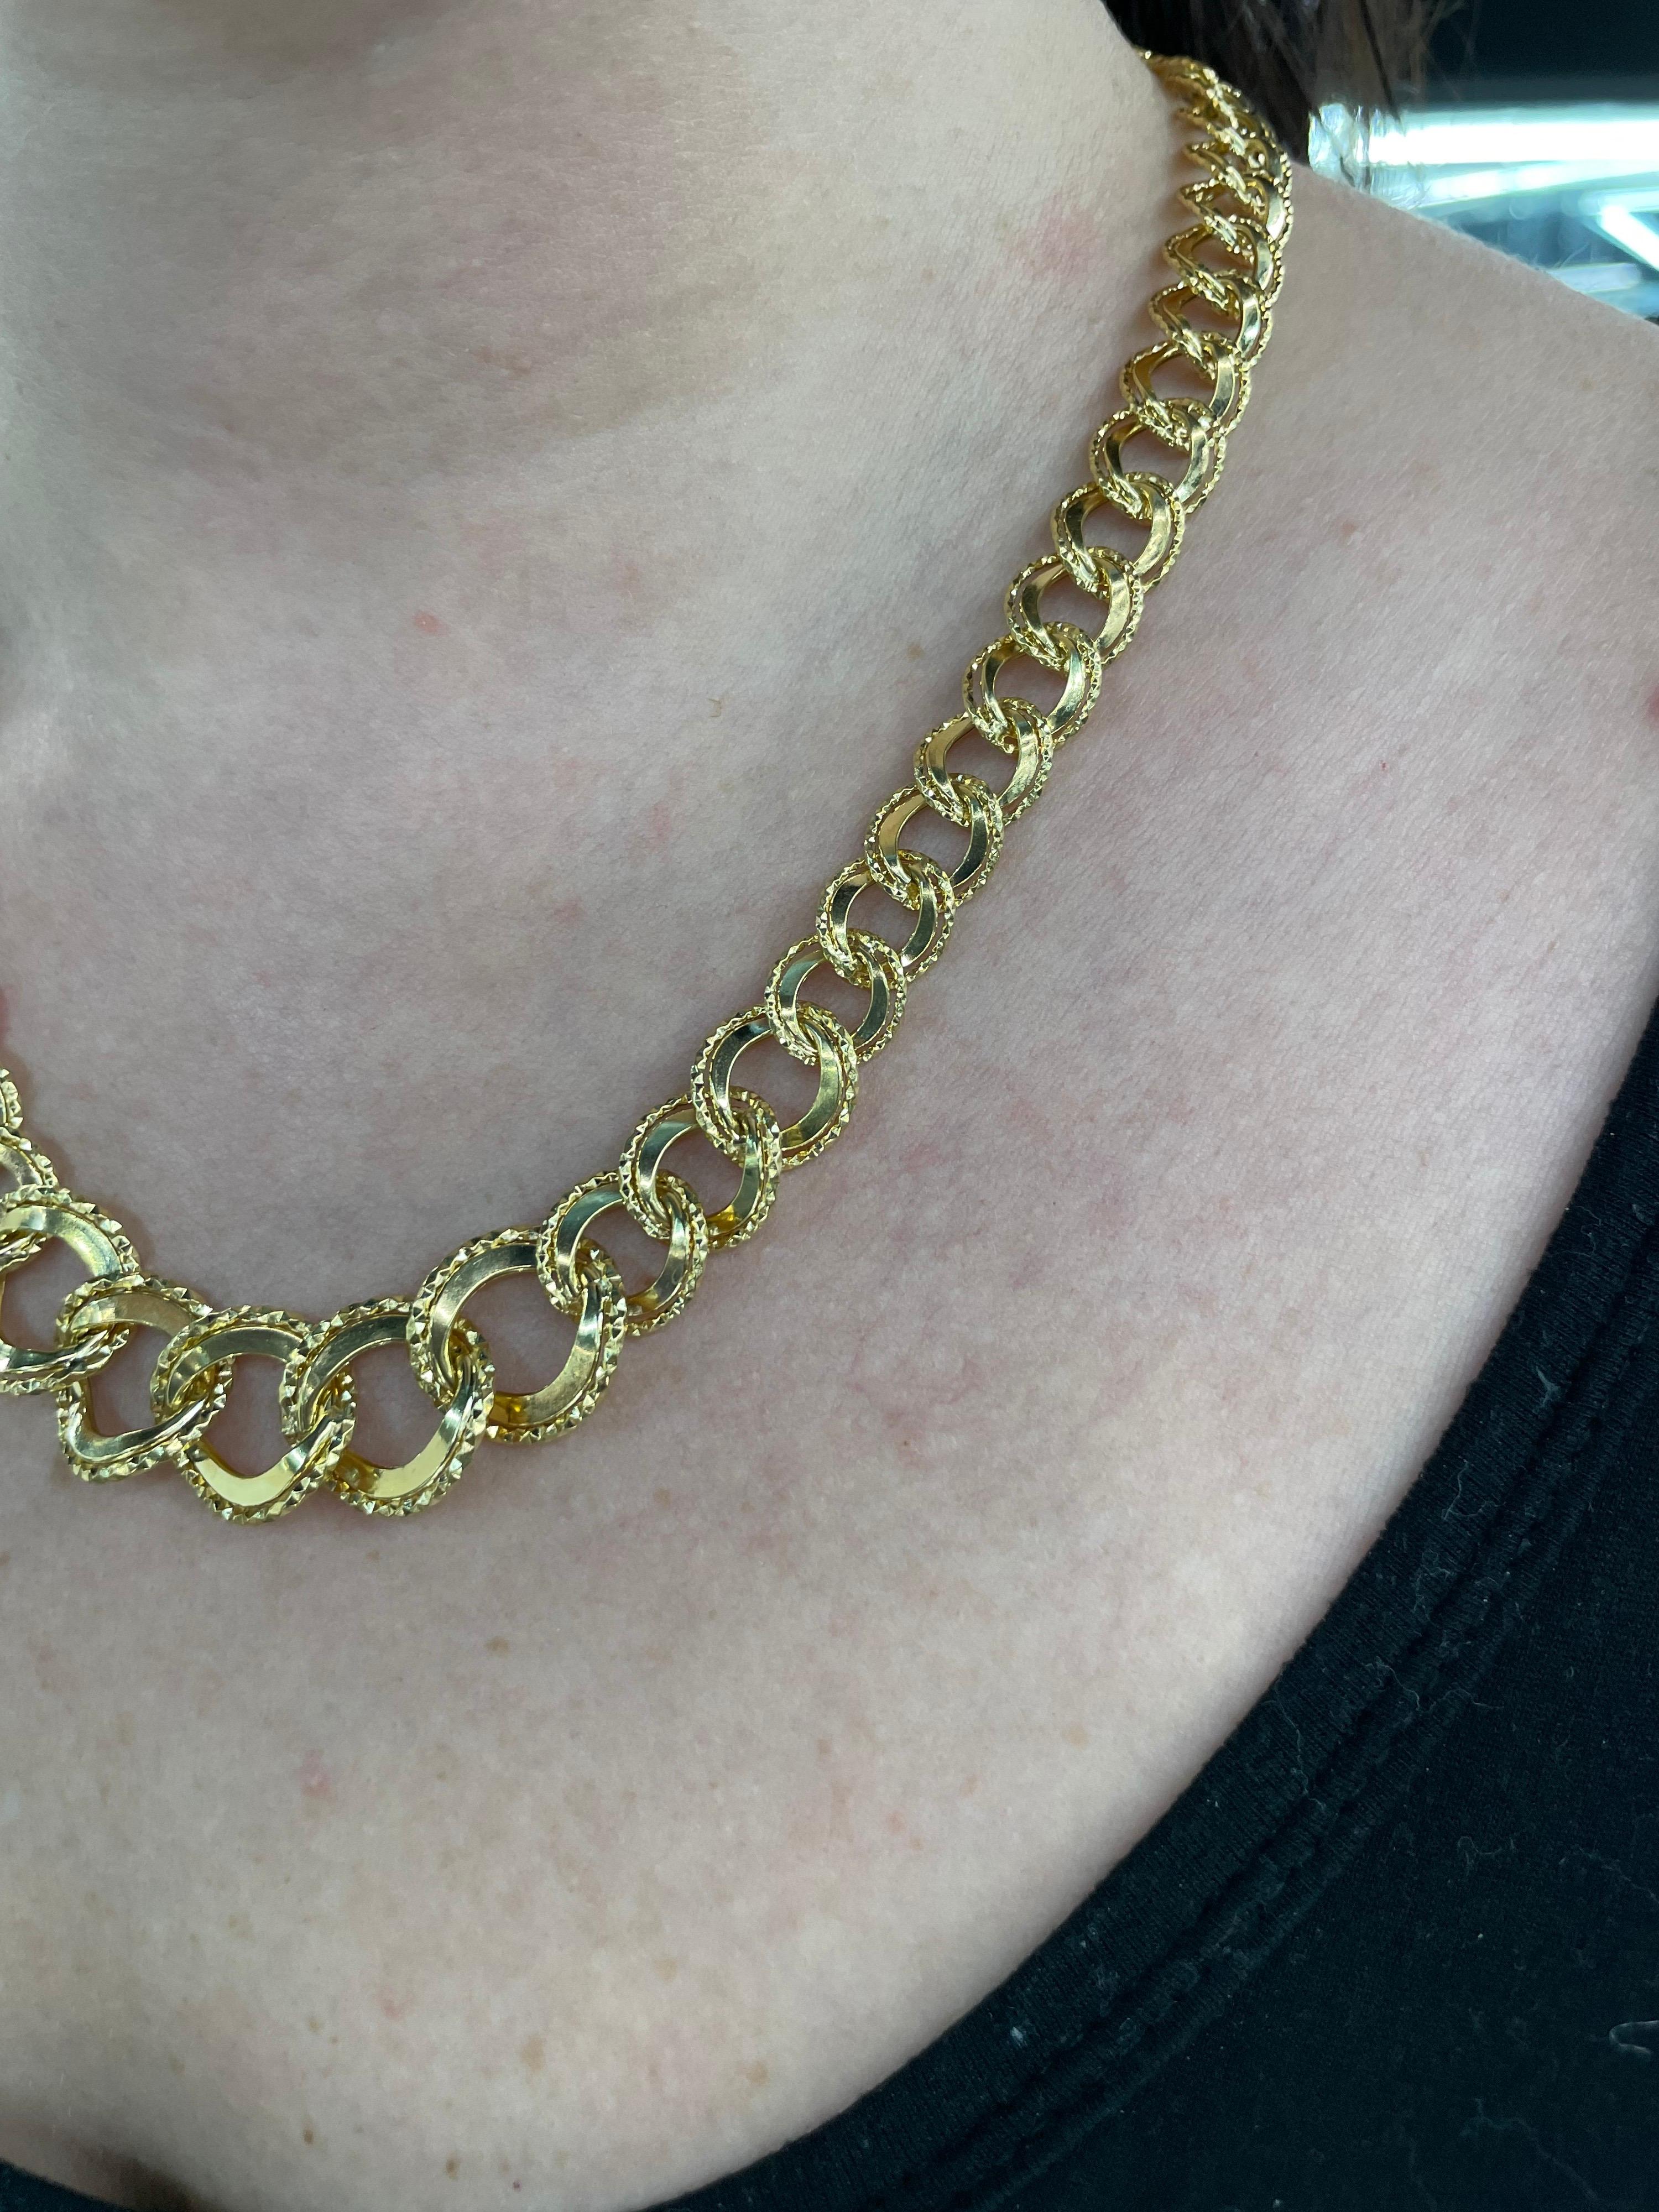 14 Karat yellow gold necklace featuring 61 graduated links with a high polish & hammered motif. 
11/16